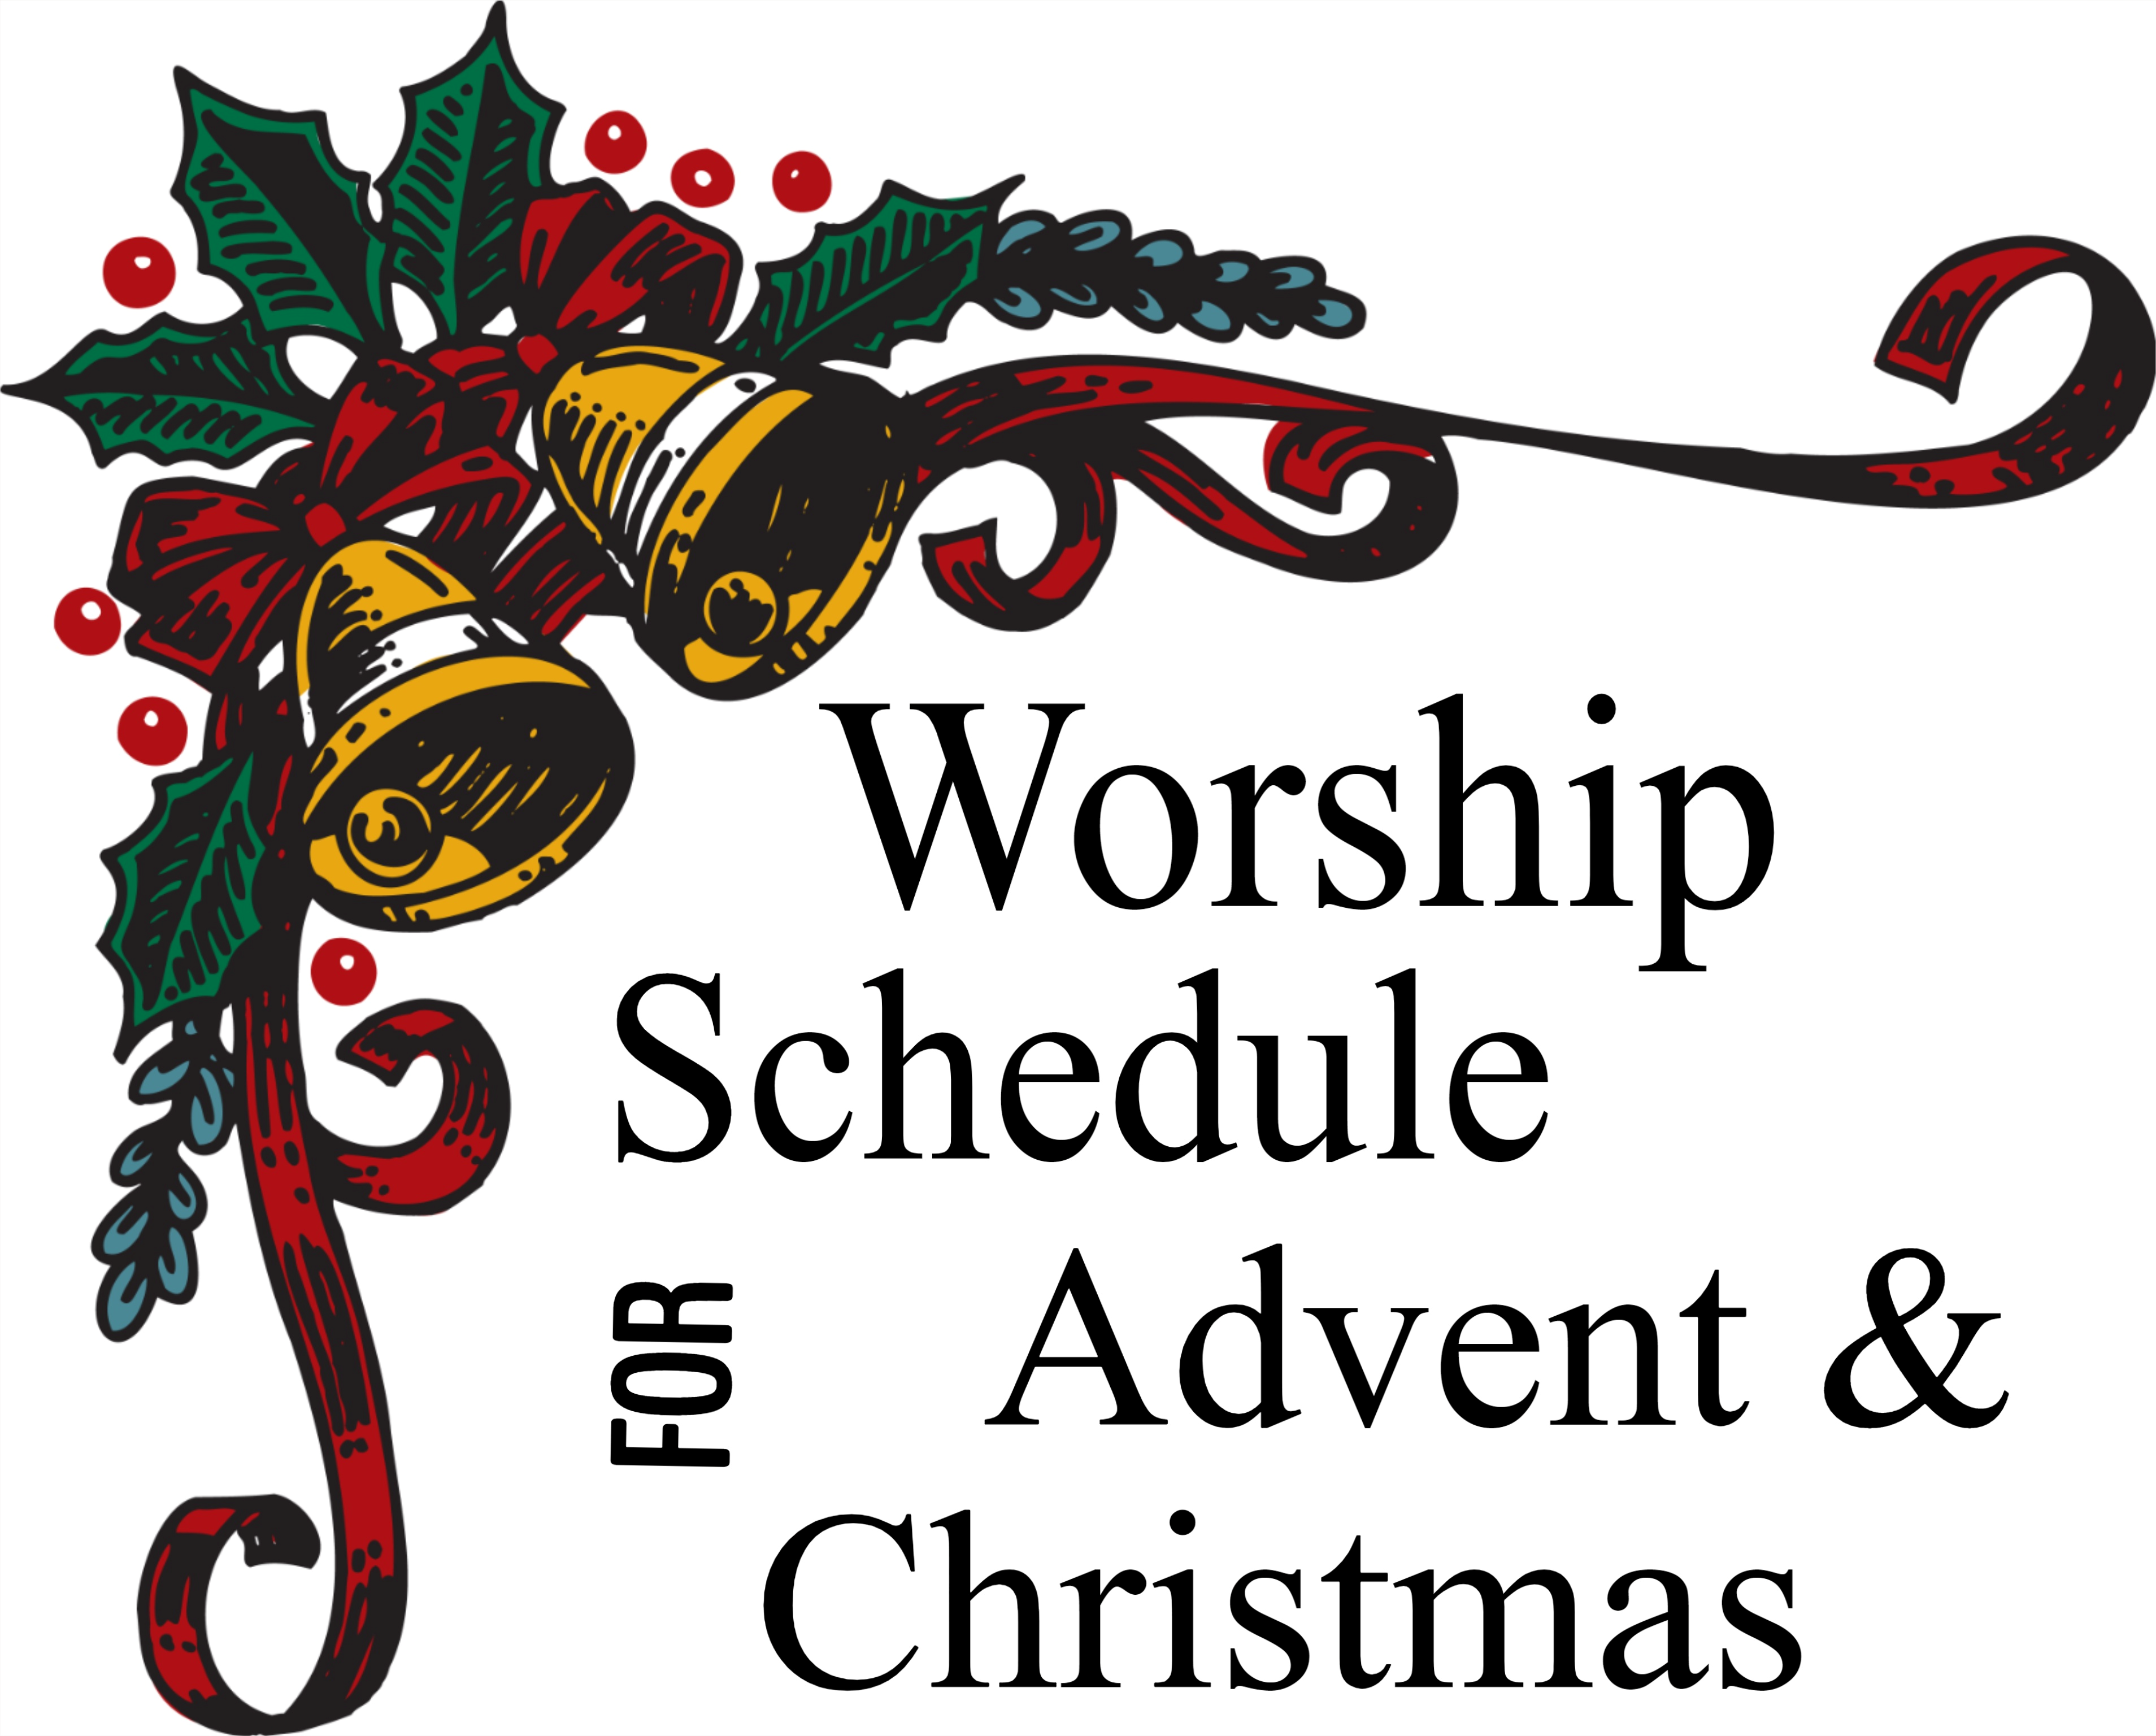 Worship schedule for Advent & Christmas